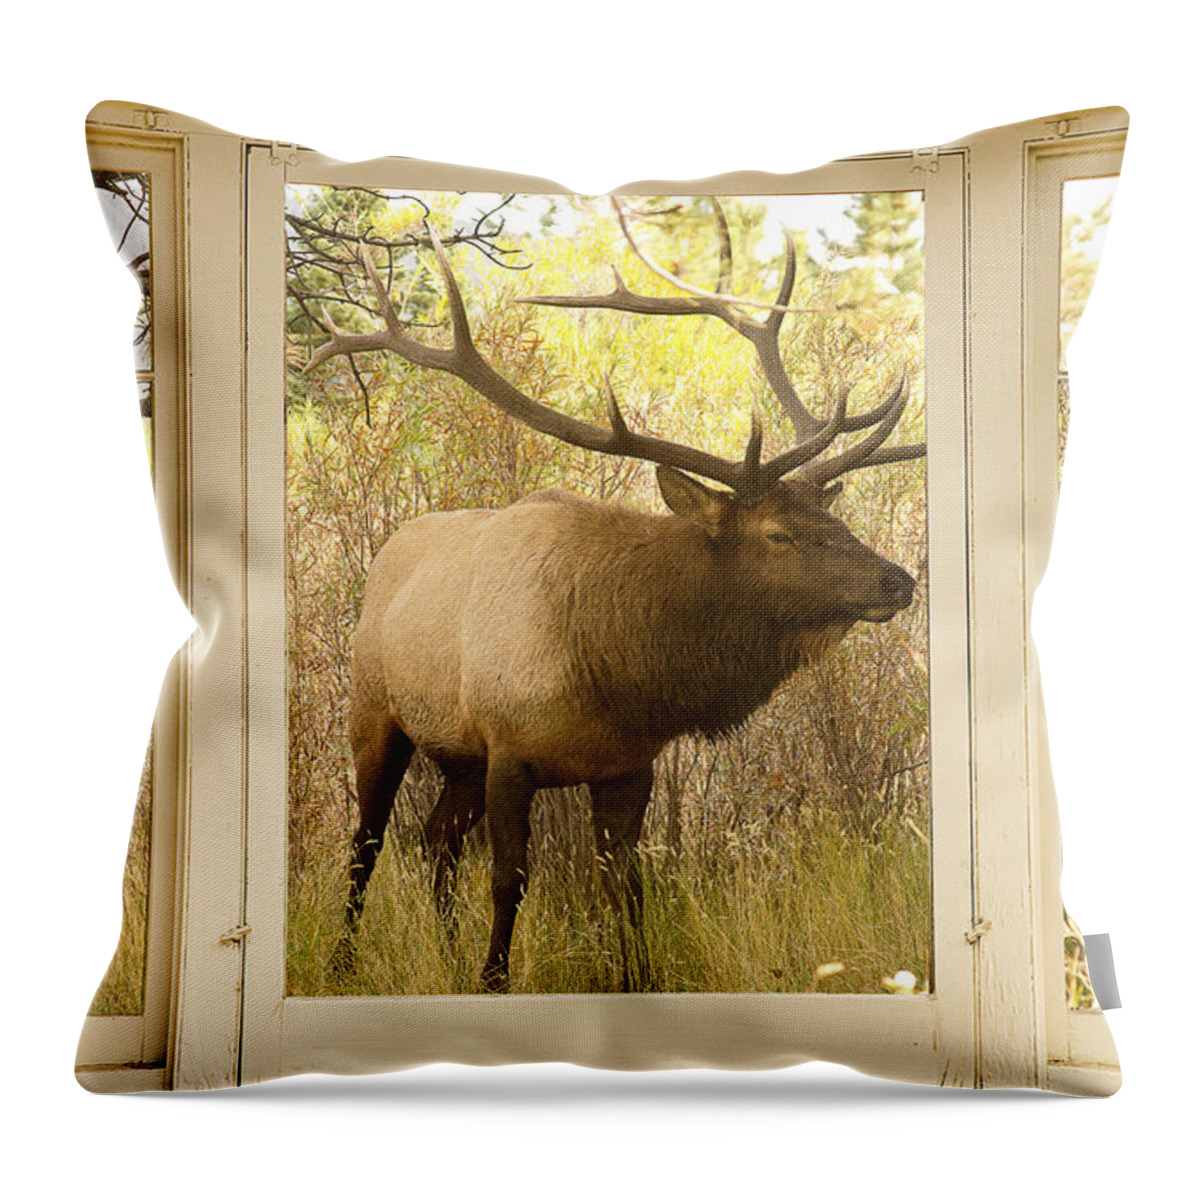 Windows Throw Pillow featuring the photograph Bull Elk Window View by James BO Insogna